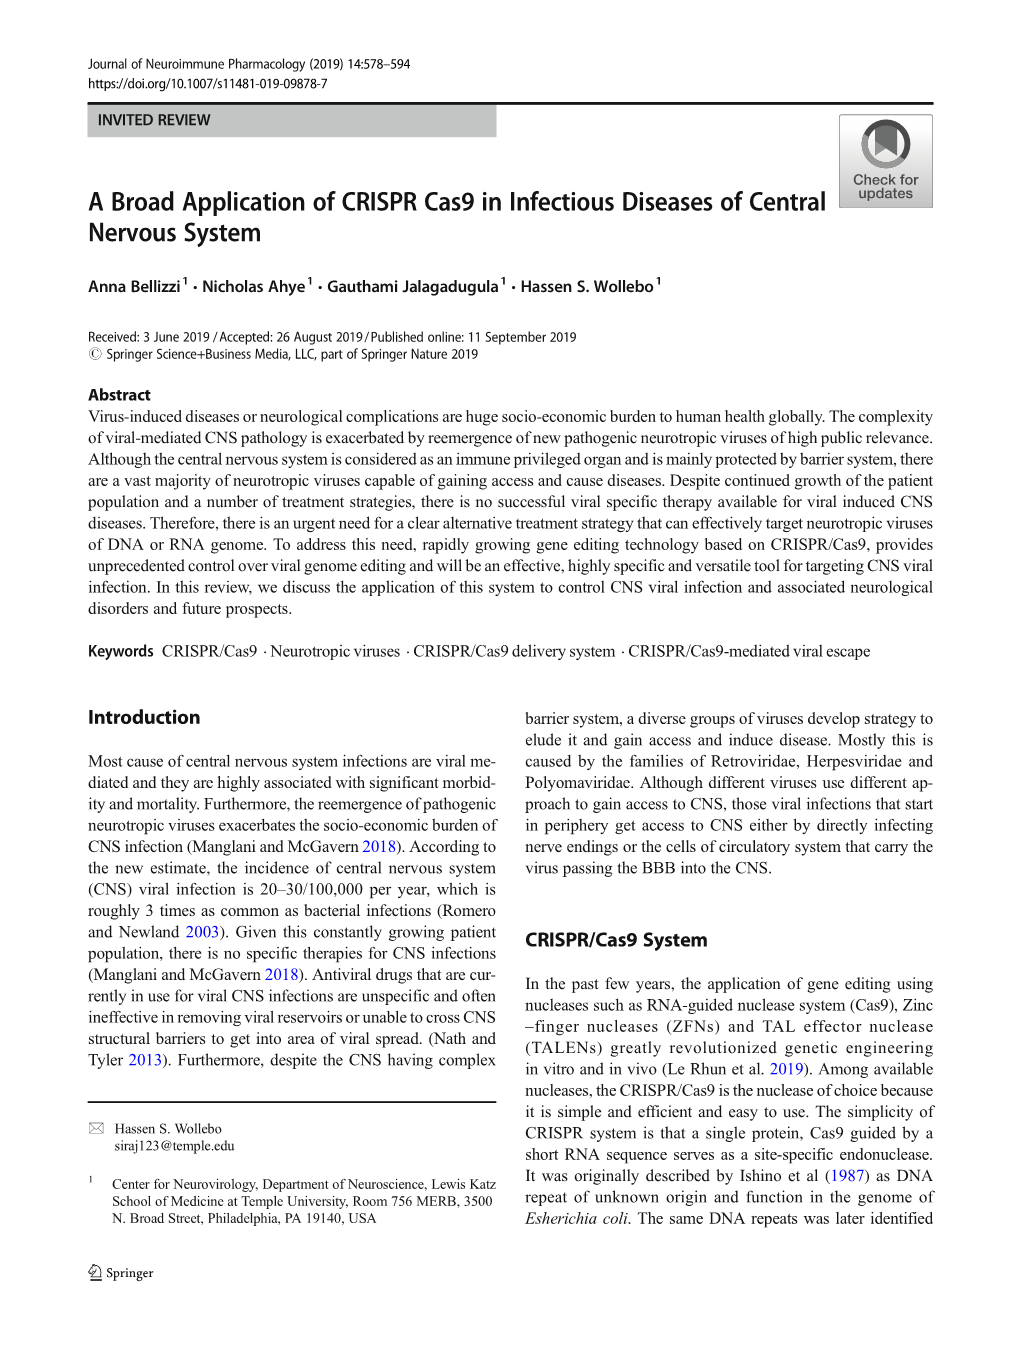 A Broad Application of CRISPR Cas9 in Infectious Diseases of Central Nervous System